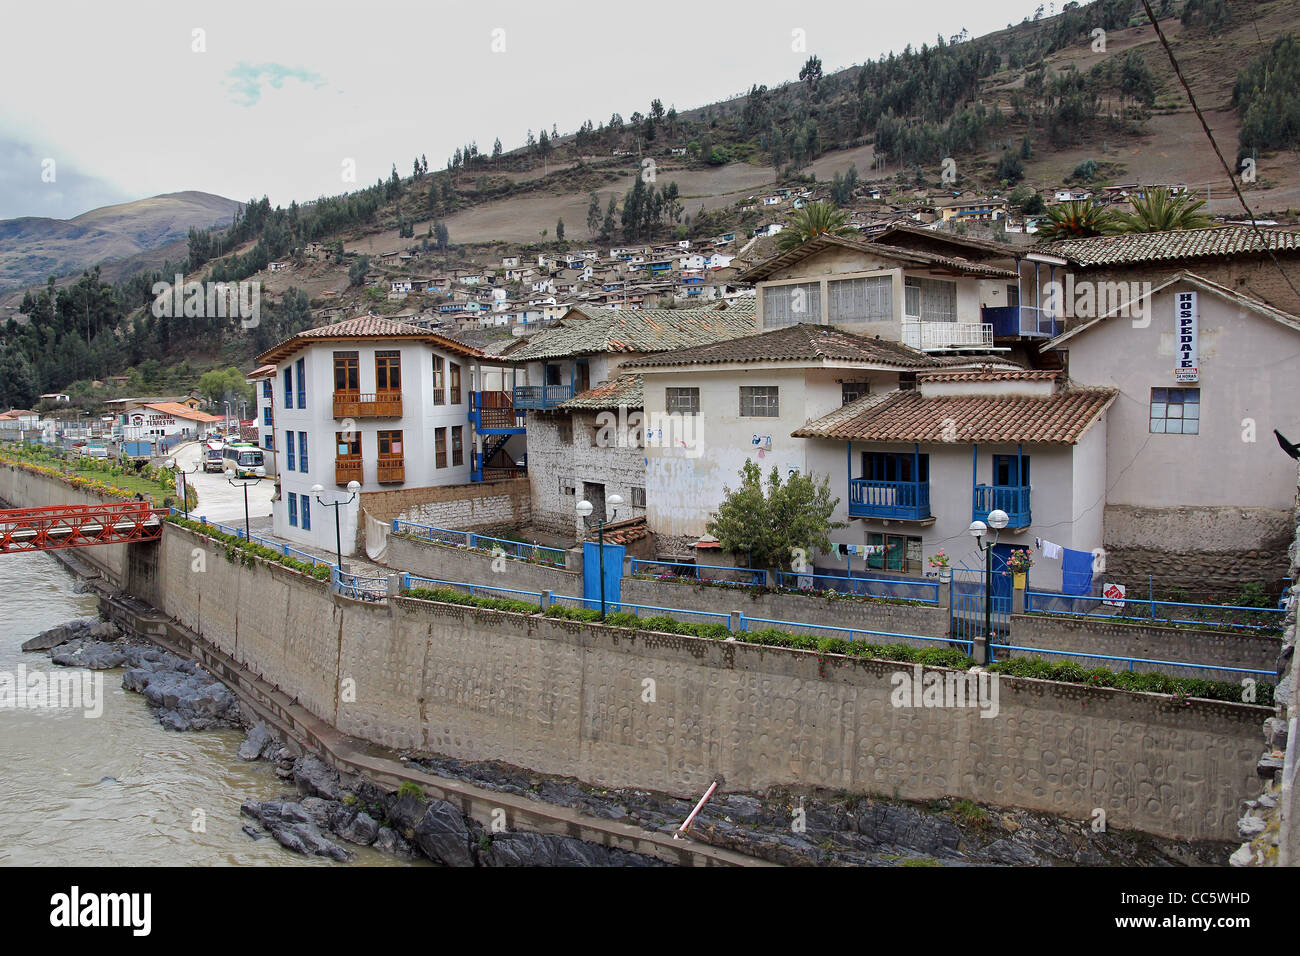 A lovely small mountain village along a river in the Andes Mountains, Peru Stock Photo